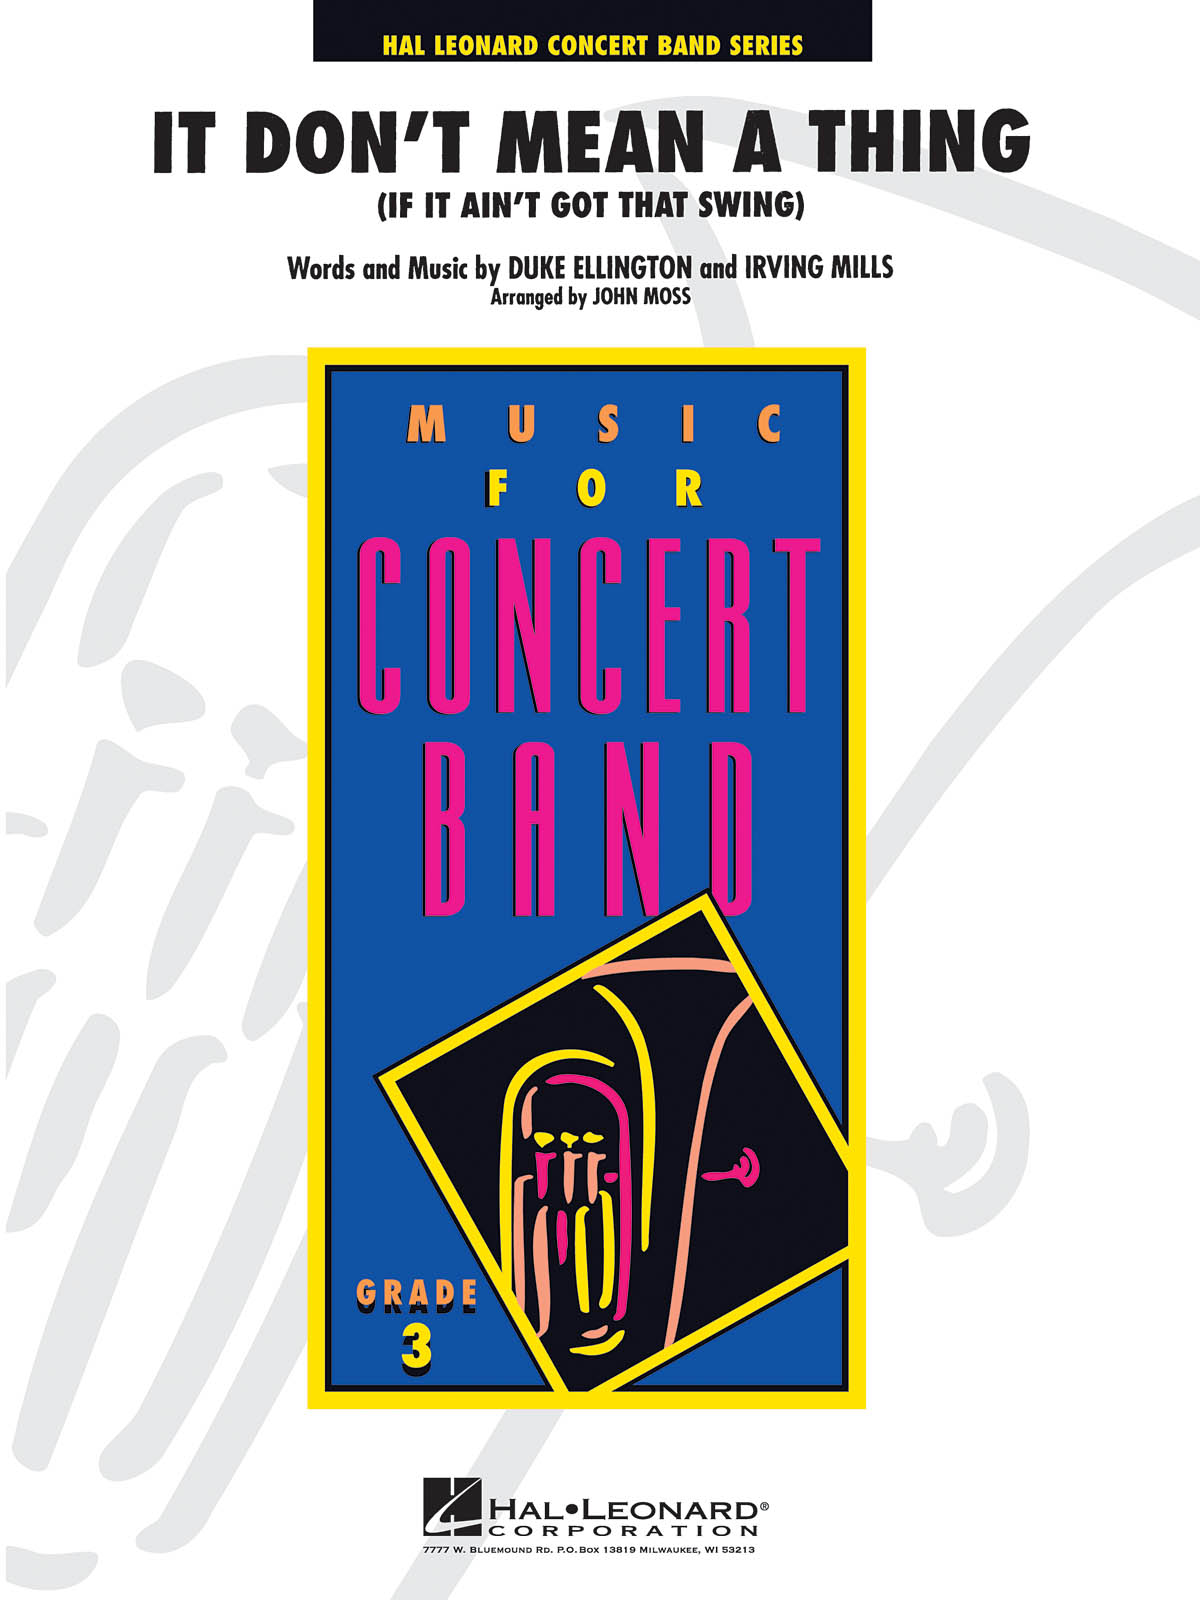 It Don't Mean a Thing: Concert Band: Score & Parts